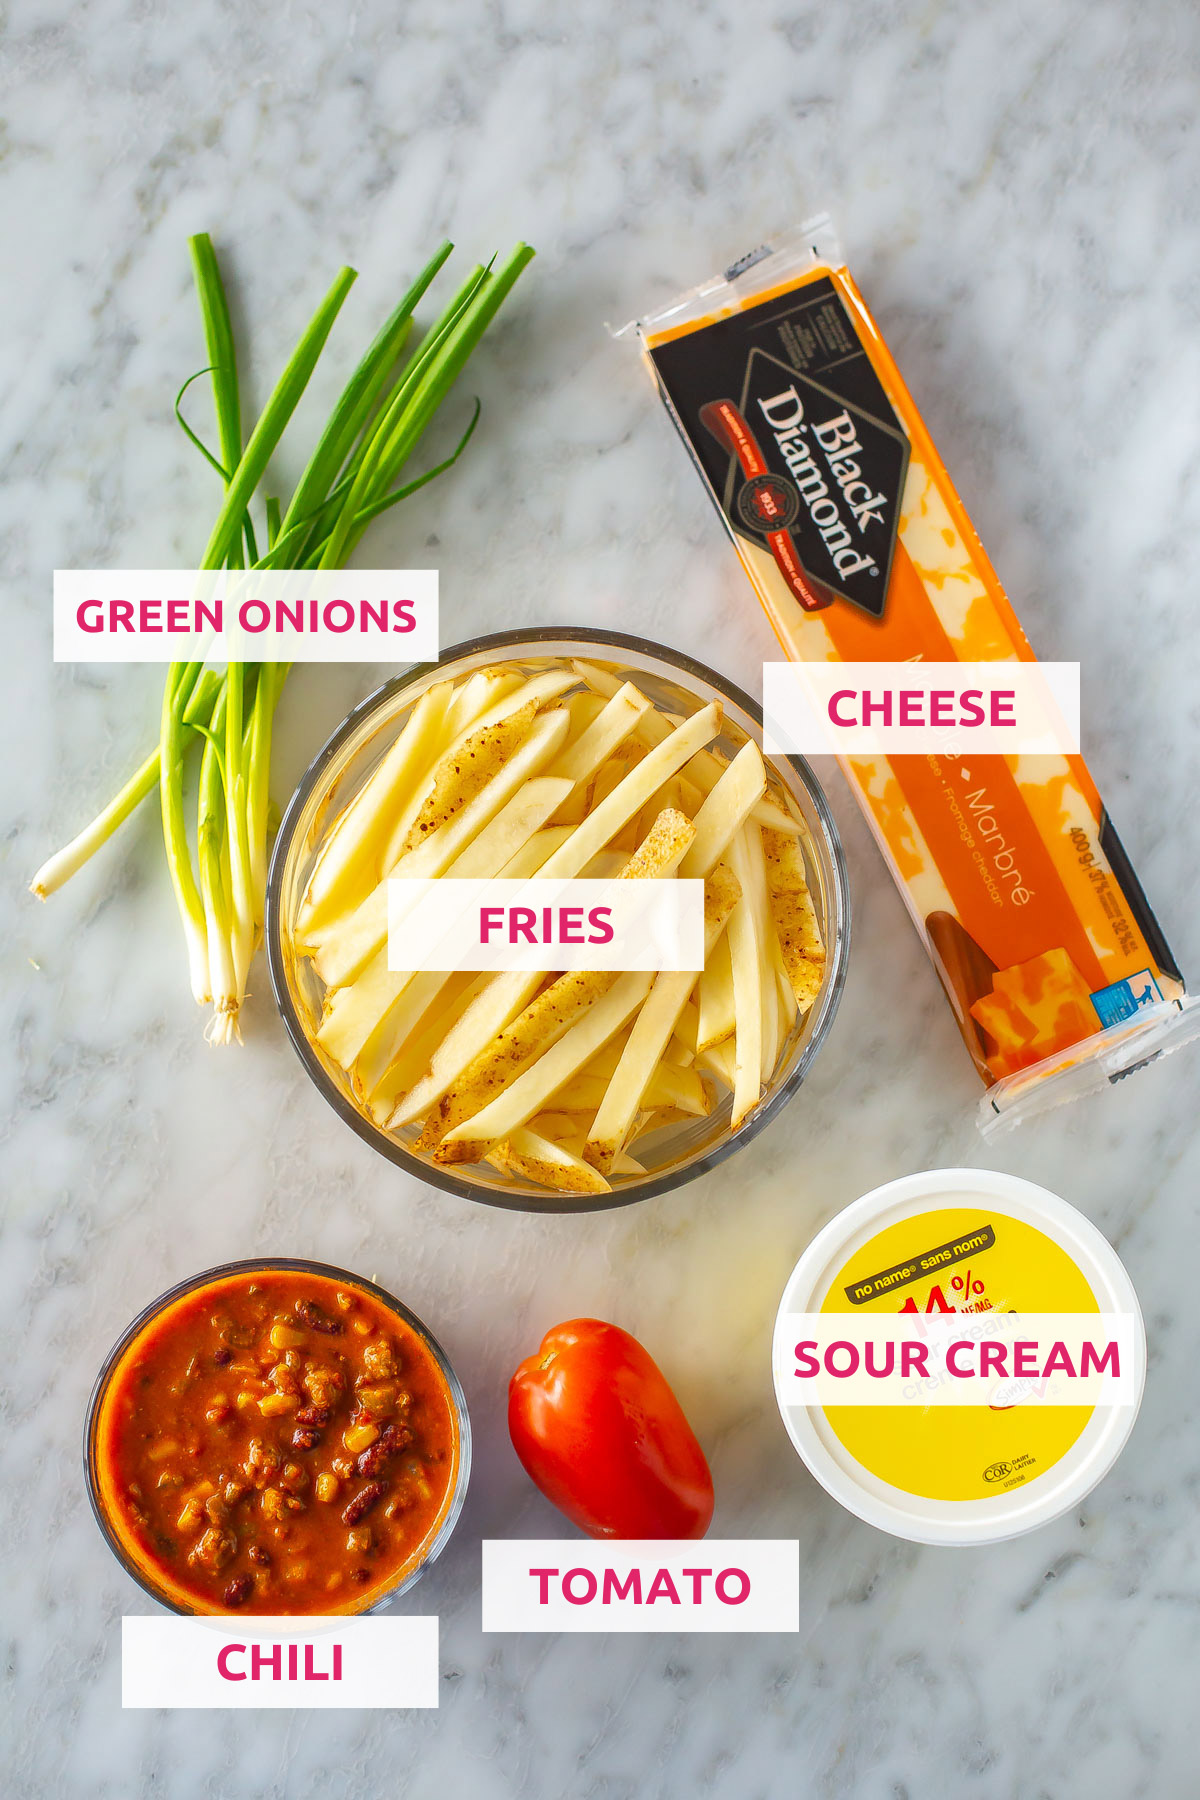 Ingredients for chili cheese fries: chili, tomato, sour cream, green onions, fries and cheese.